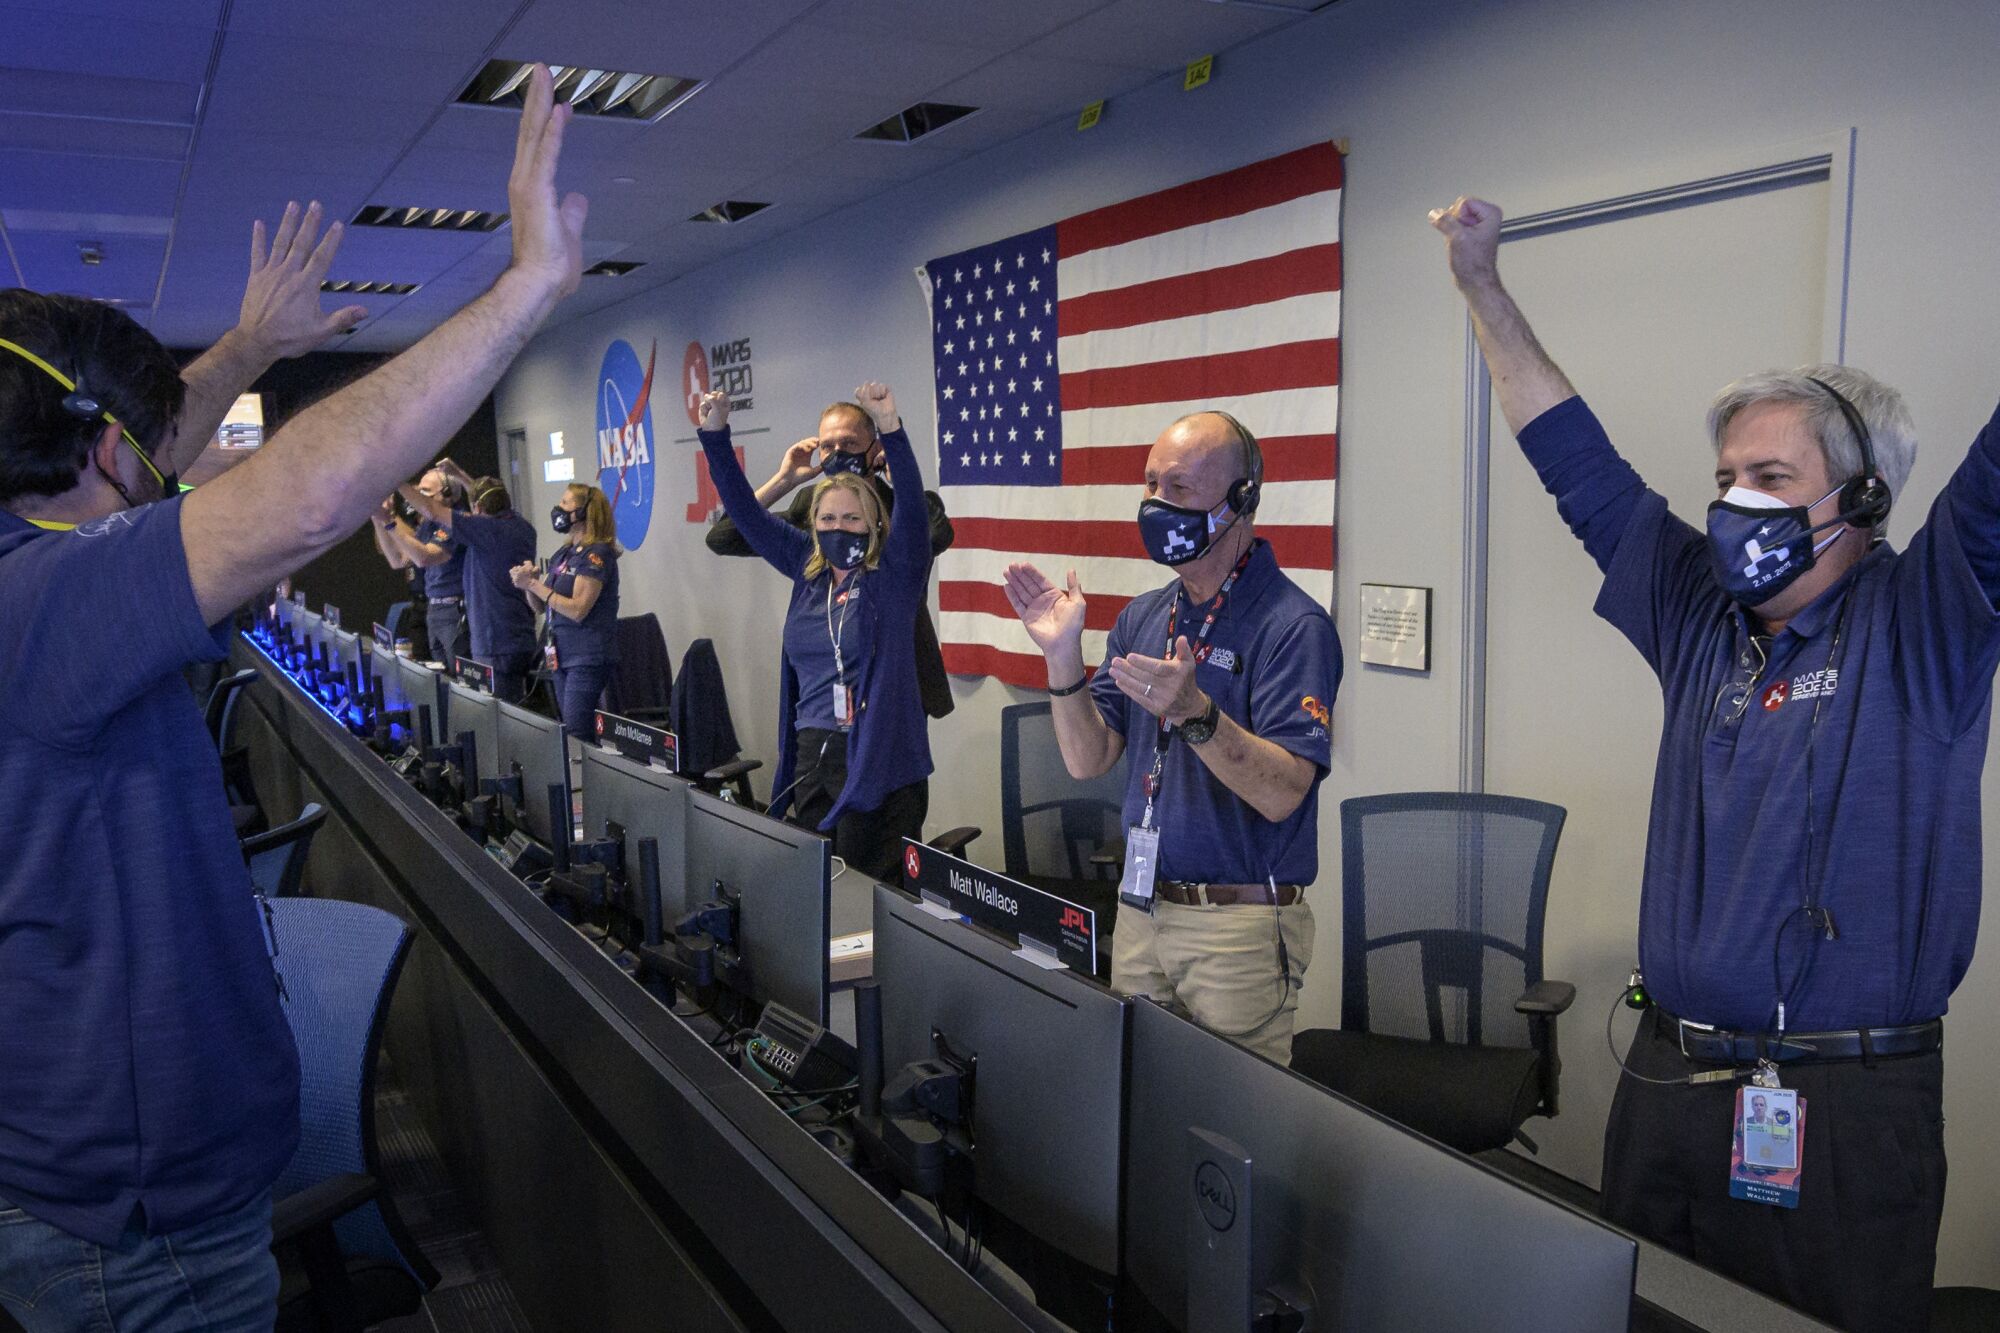 NASA workers raise arms and clap in celebration in mission control